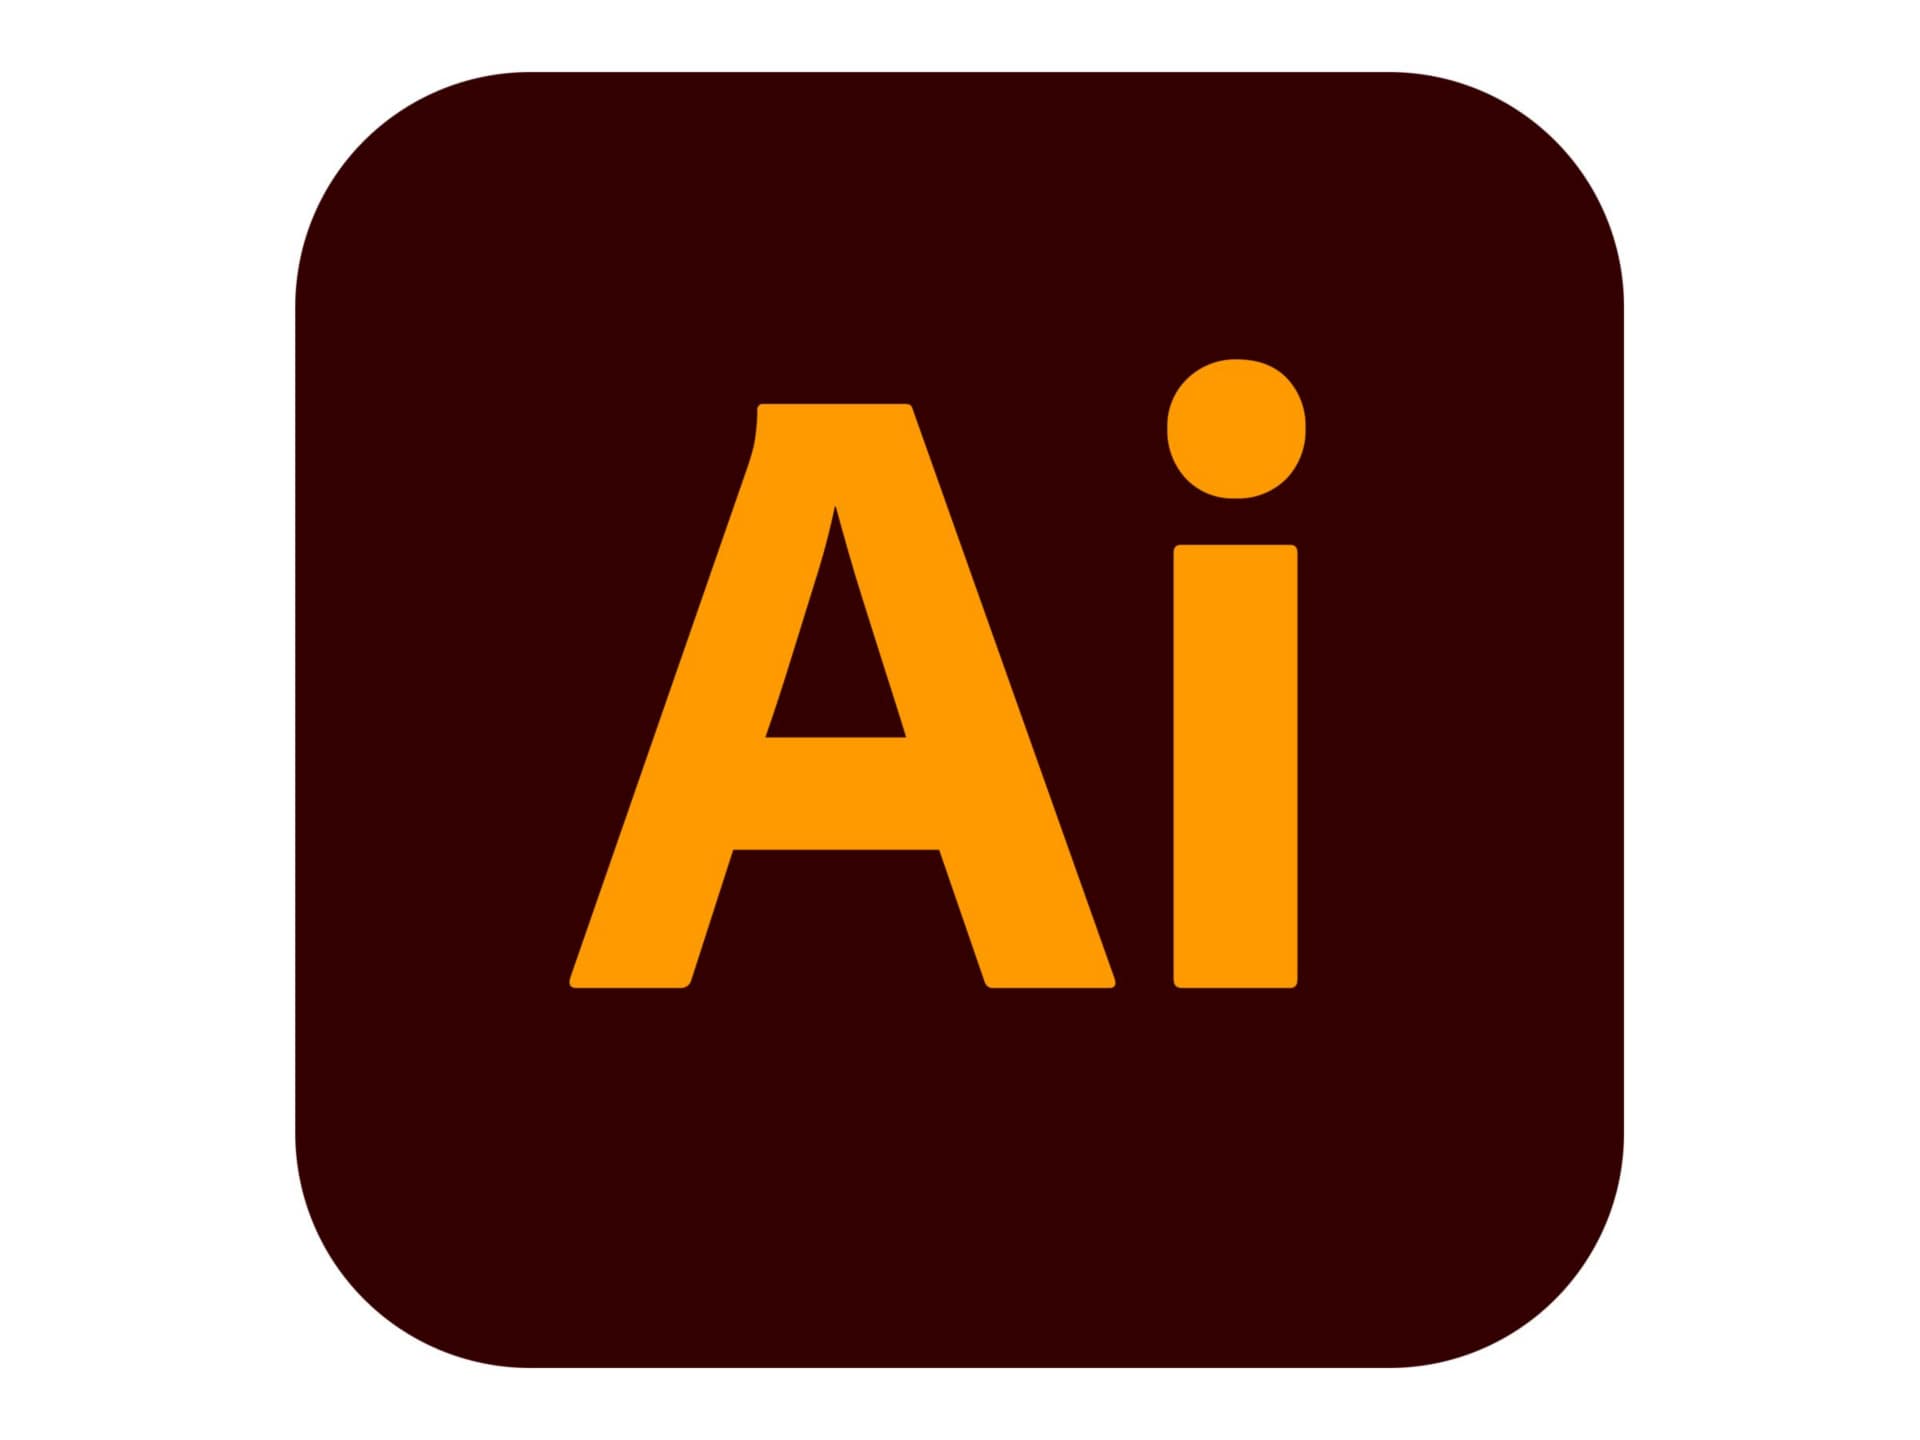 Adobe Illustrator CC for teams - Subscription New (10 months) - 1 named user